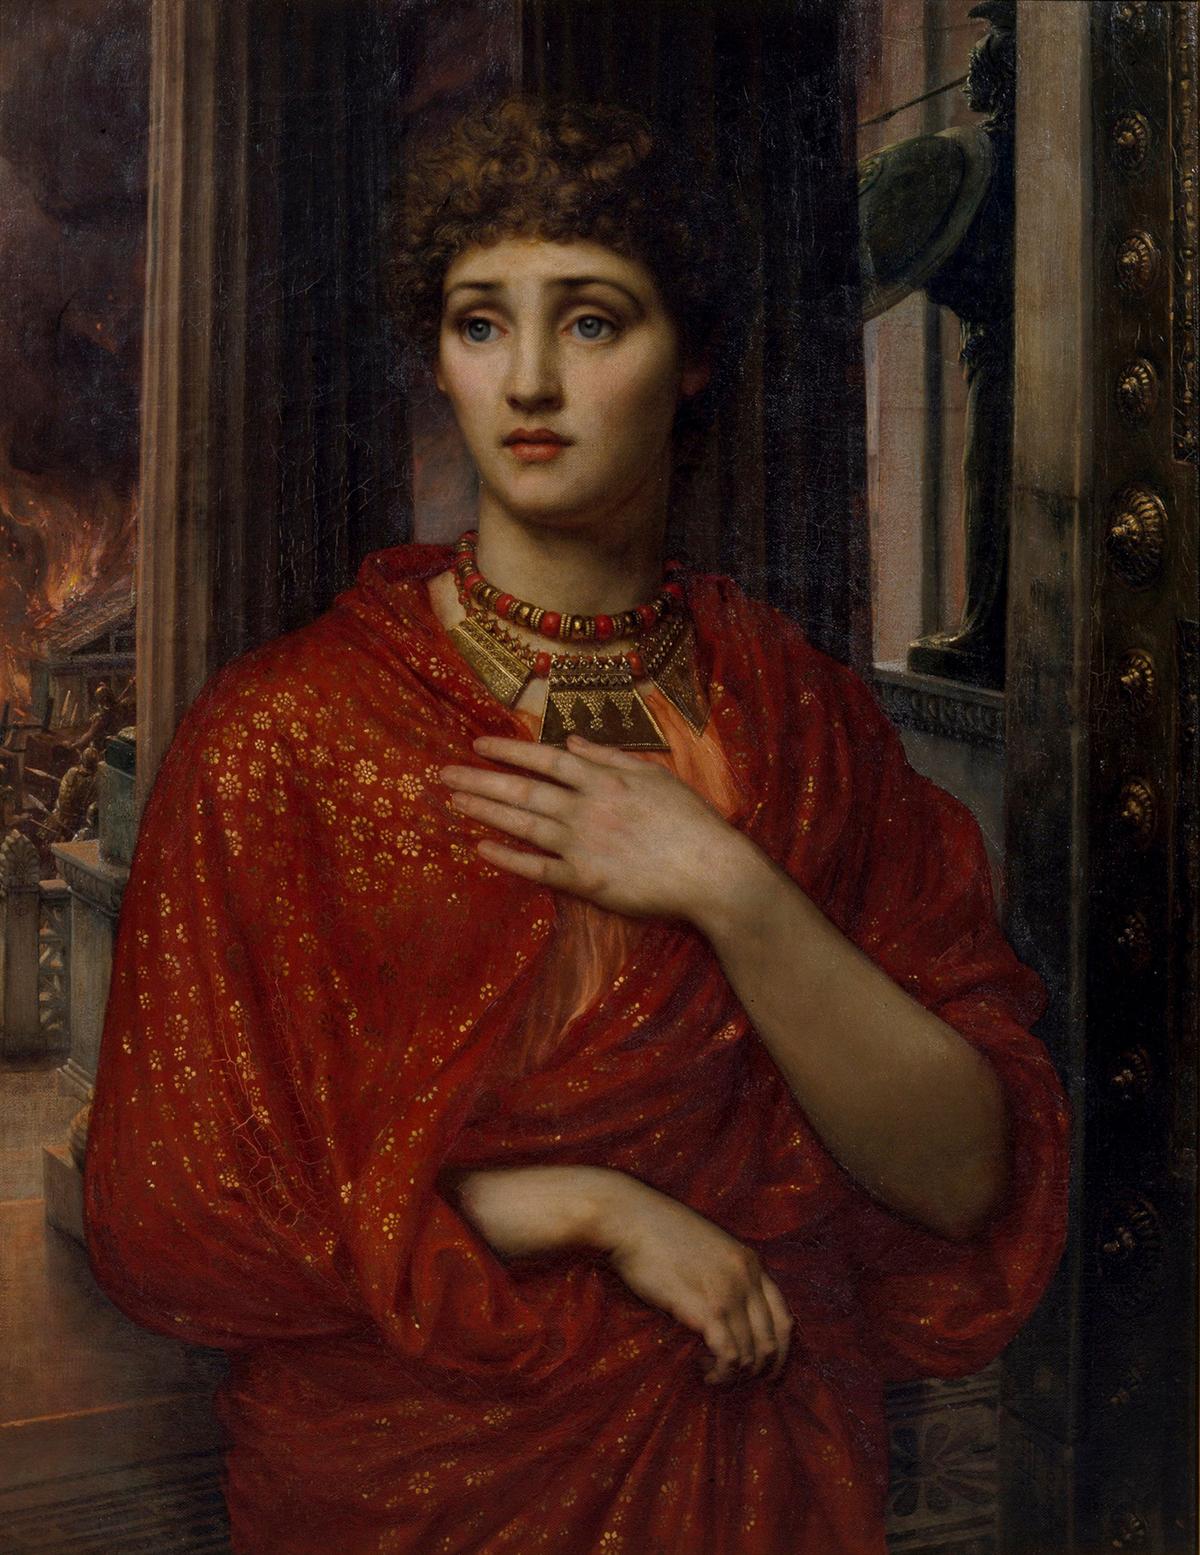 "Helen," 1881, by Sir Edward John Poynter. Oil on canvas; 36.1 inches by 28.1 inches. Art Gallery of New South Wales, Sydney. (<a href="https://commons.wikimedia.org/wiki/File:Helen_by_Sir_Edward_John_Poynter_(1881).jpg">Edward Poynter</a>/<a href="https://creativecommons.org/licenses/by-sa/4.0/deed.en">CC BY-SA 4.0</a>)